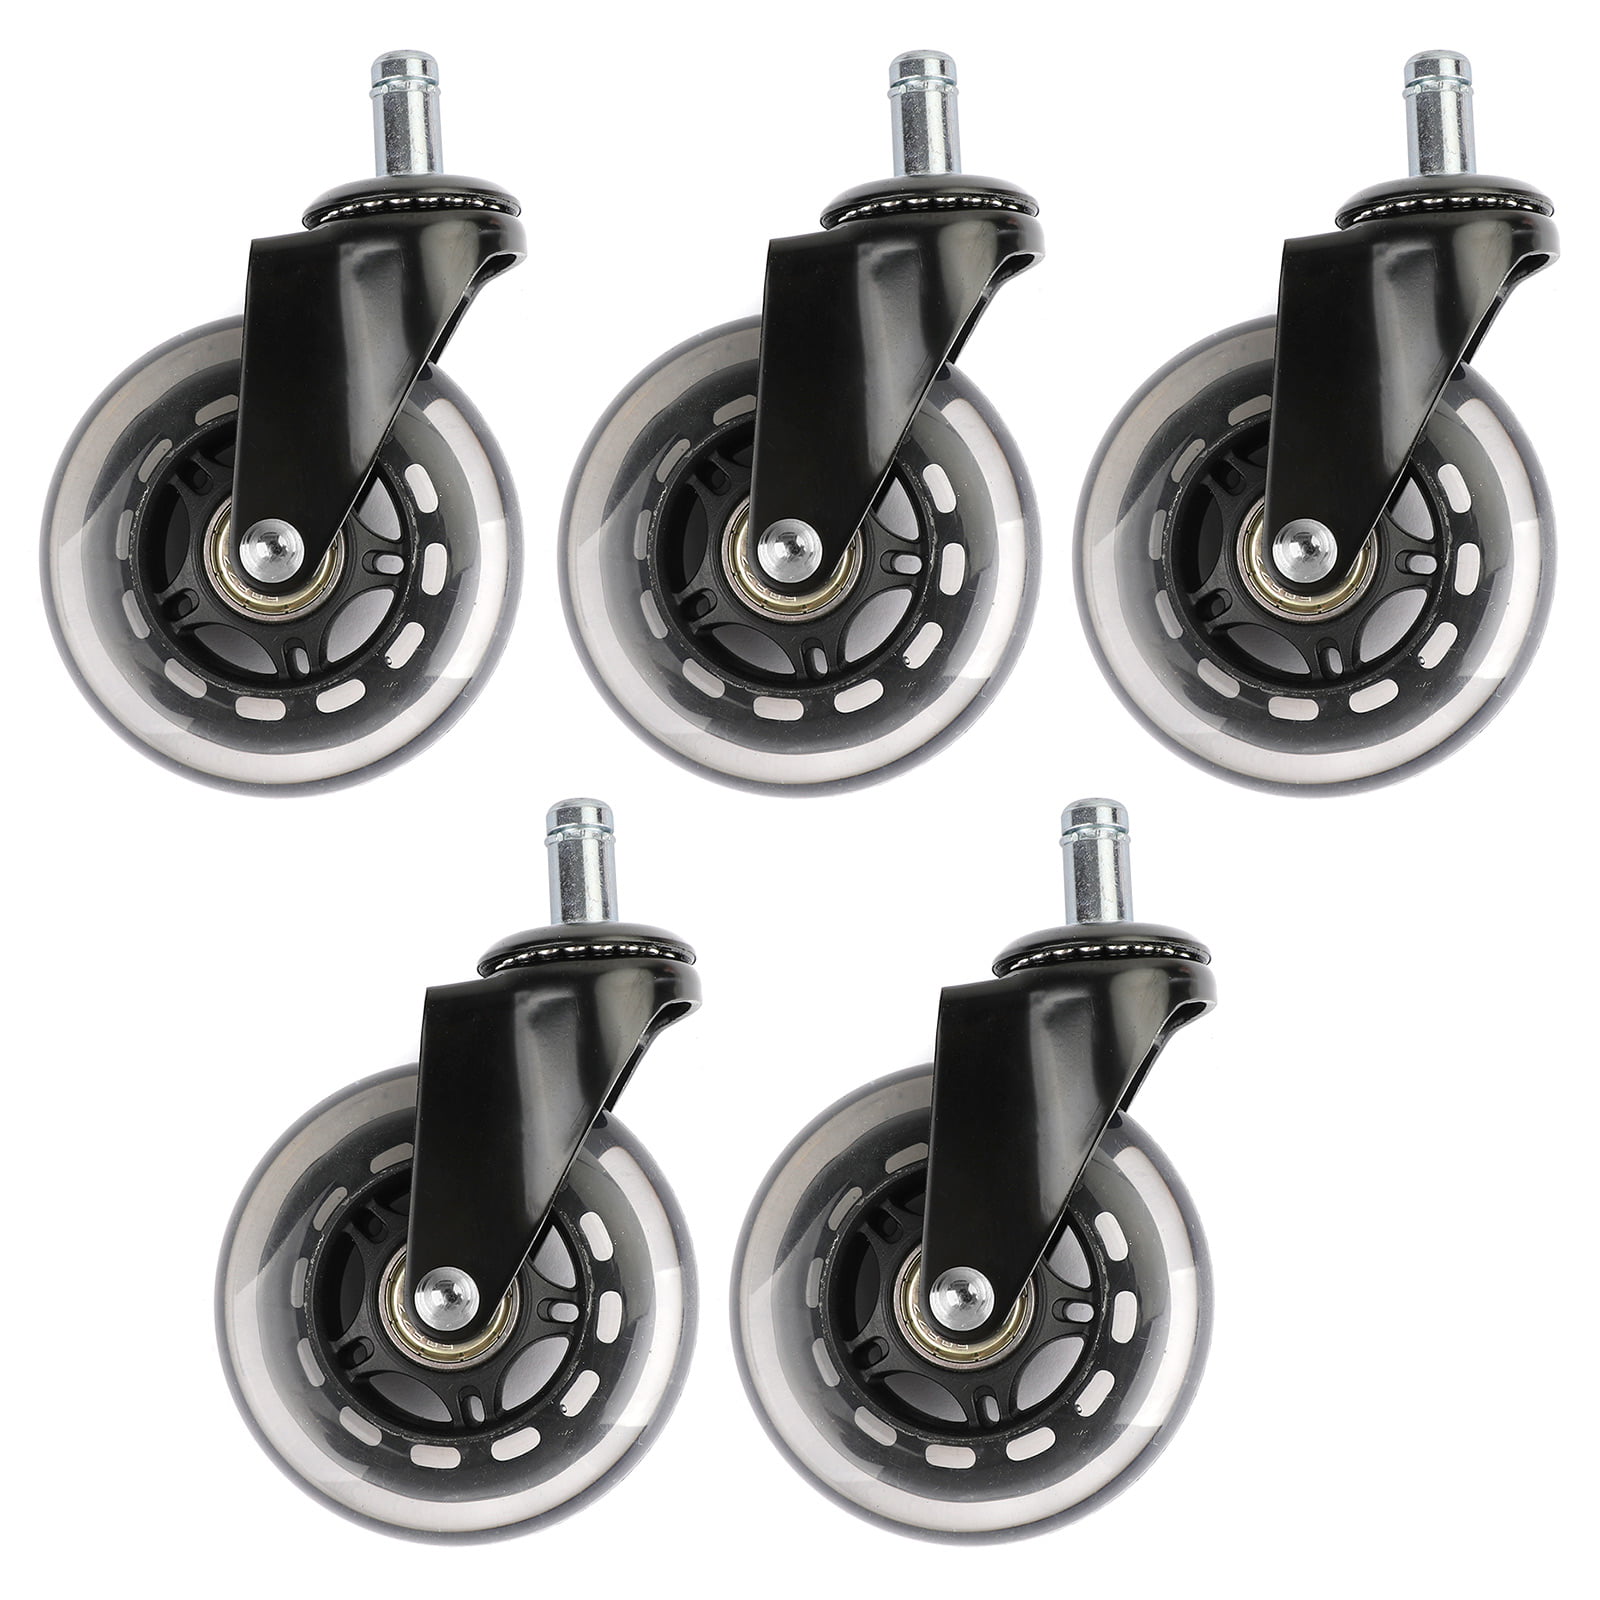 Set of 5 Office Chair Caster Rubber Swivel Wheels Replacement Heavy Duty 3 INCH 